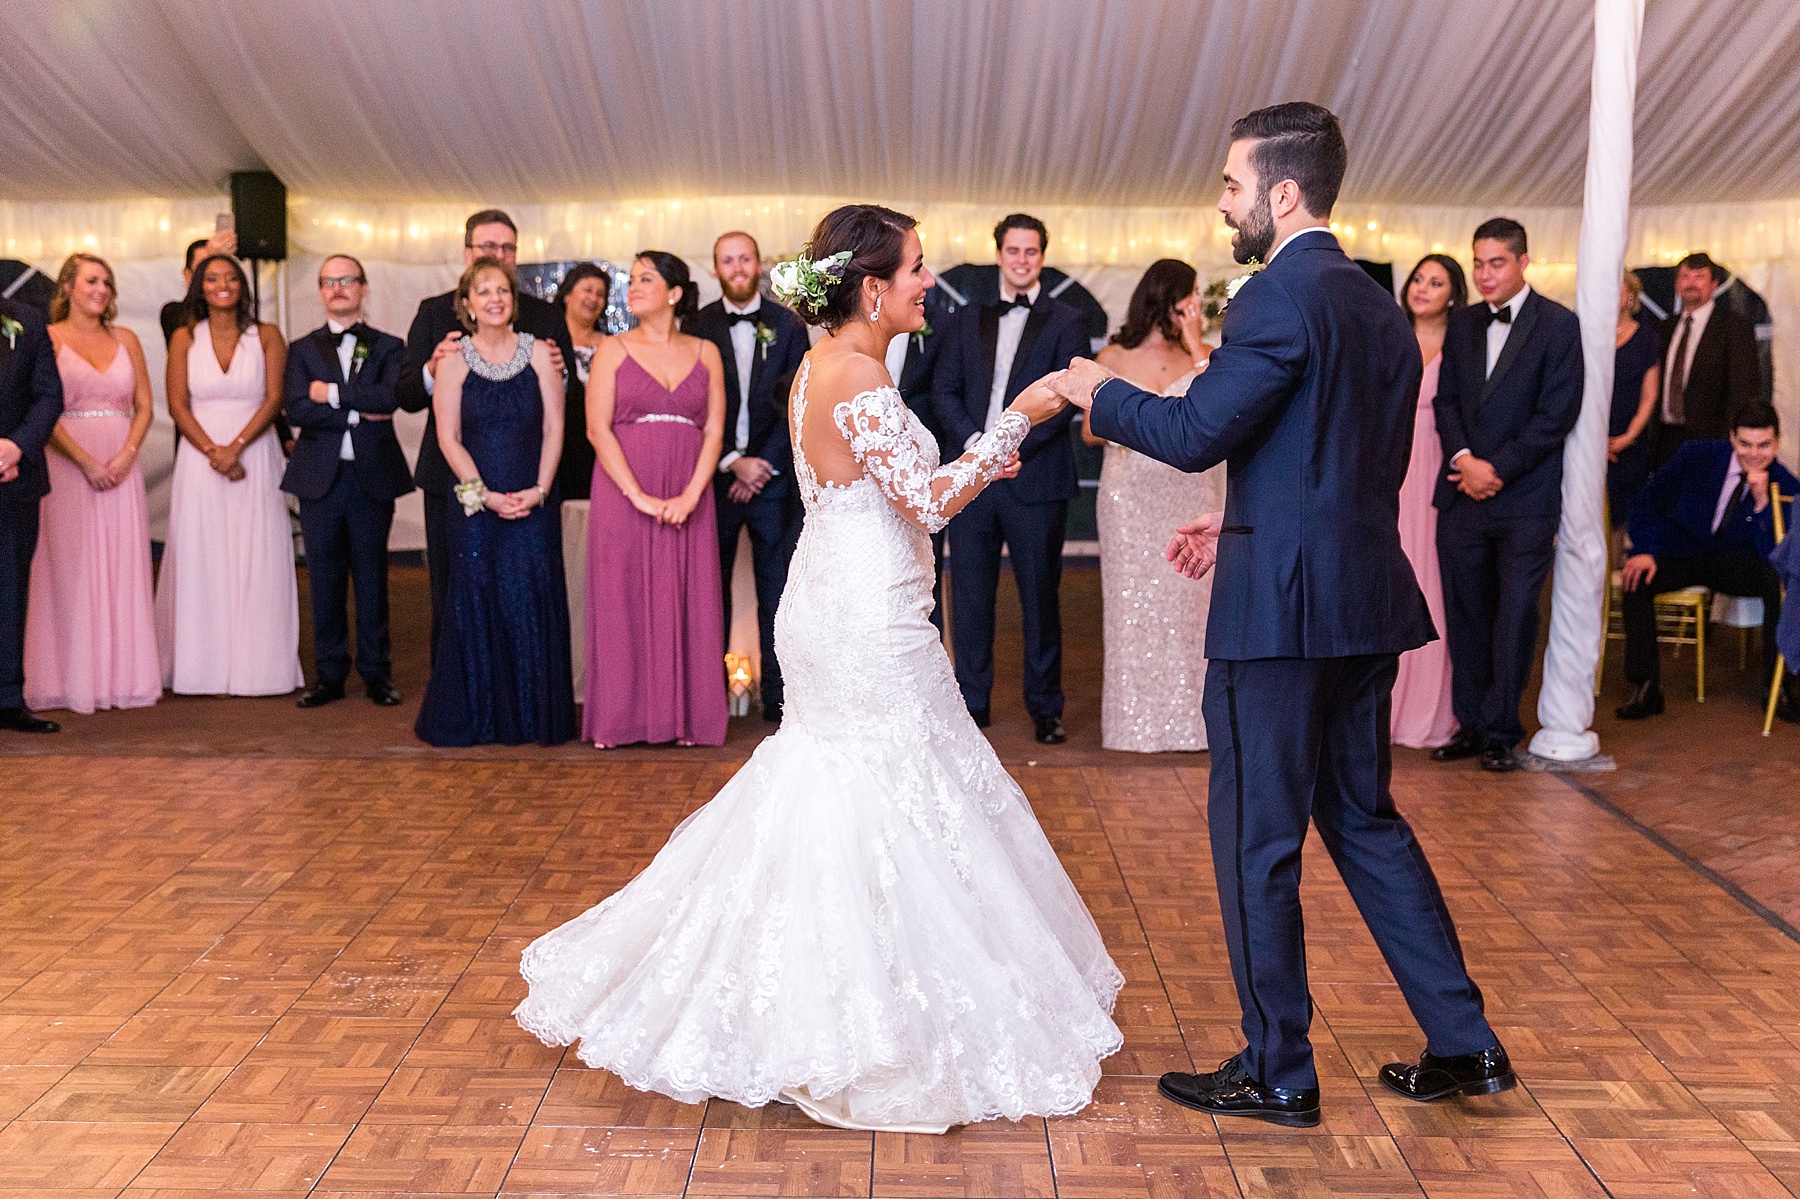 Belmont Manor wedding reception first dance photographed by Alexandra Mandato Photography